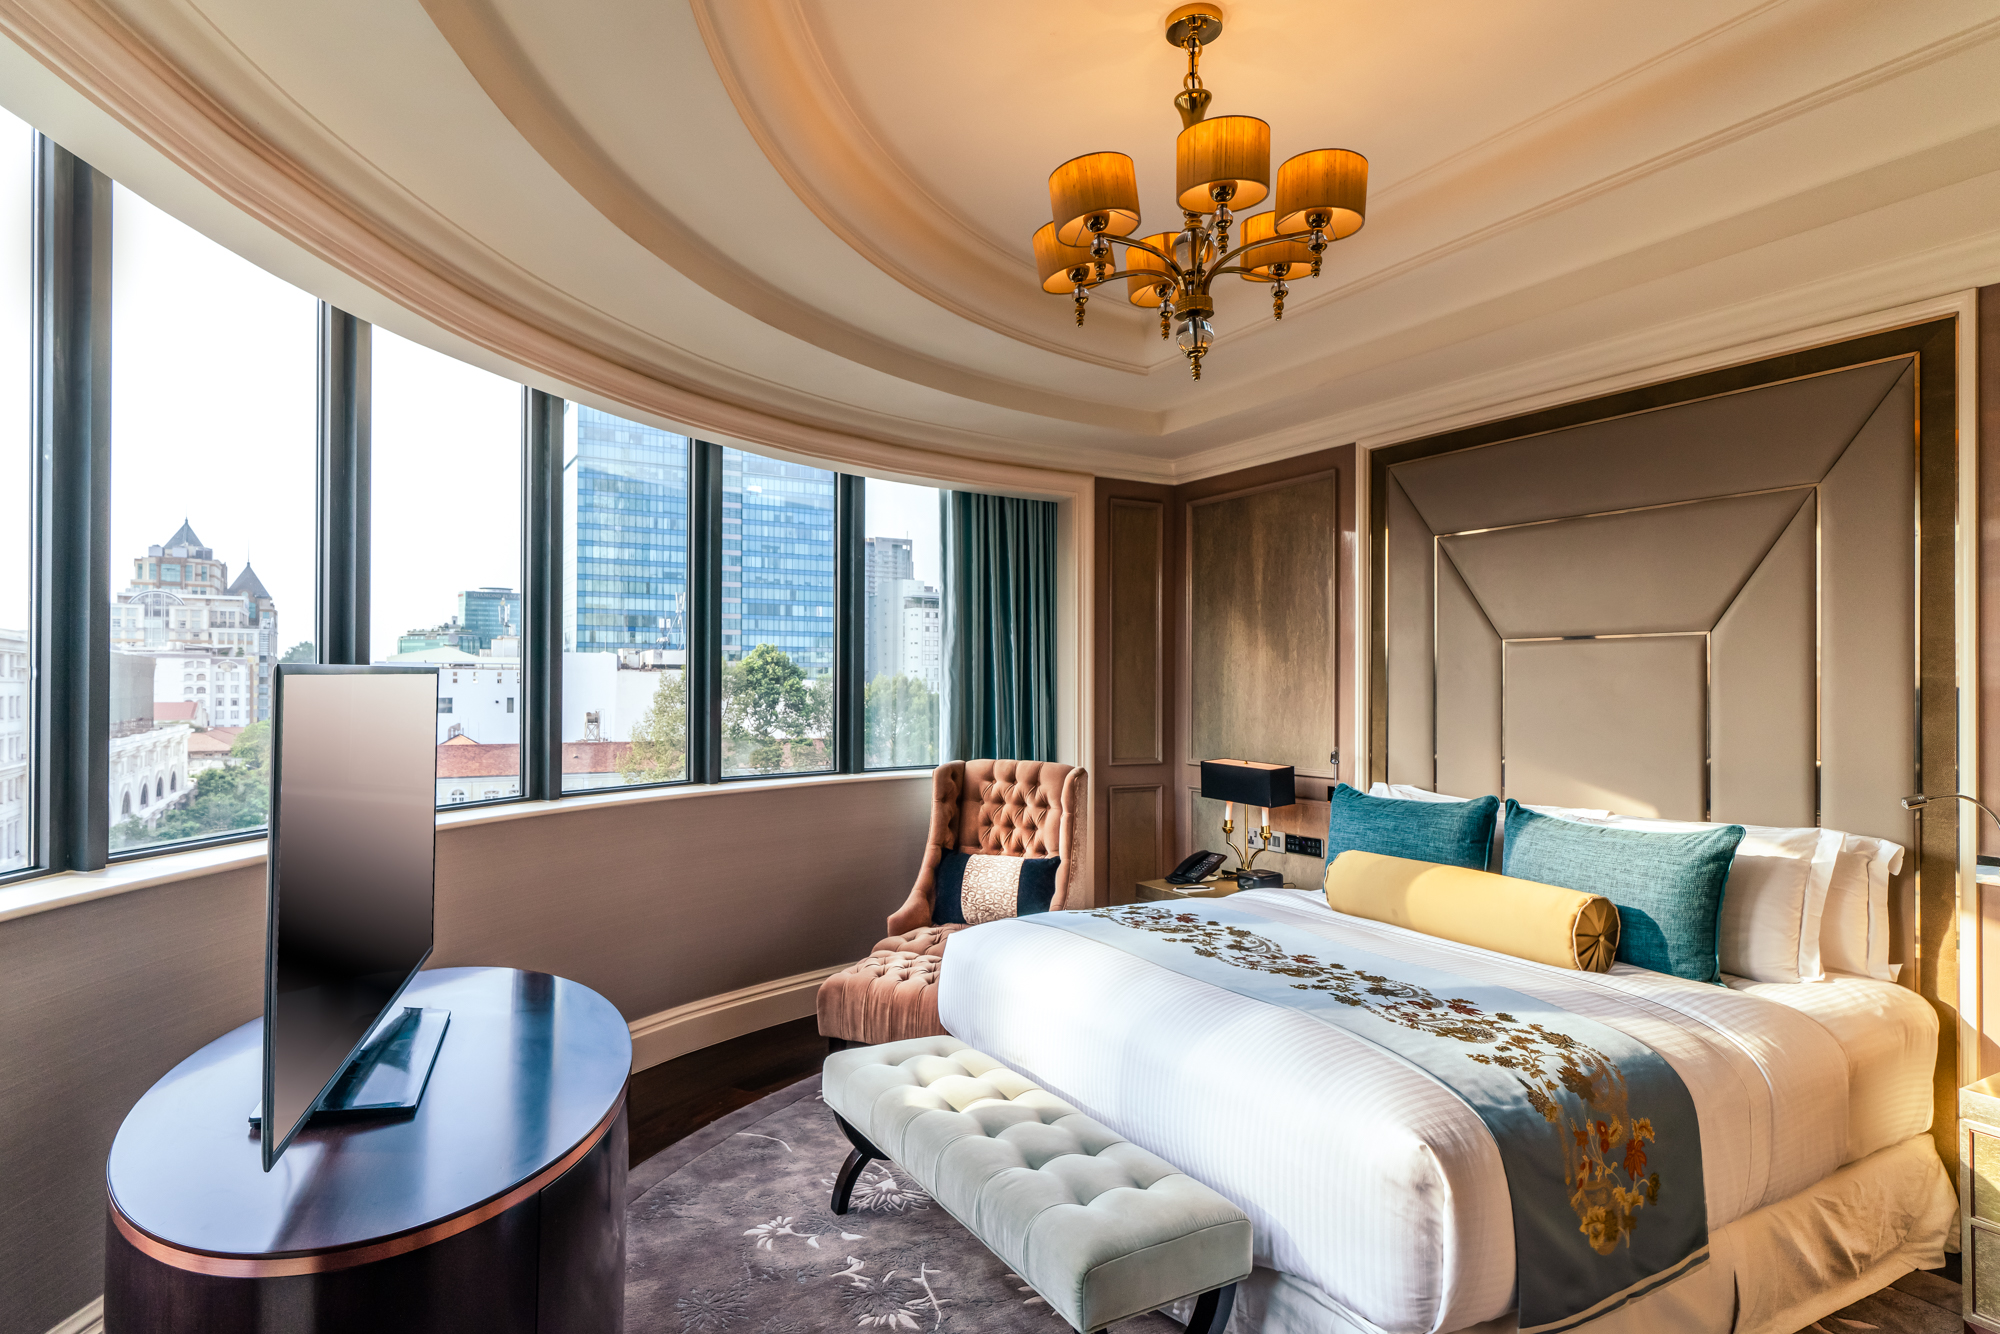 A luxury suite at a 5 star hotel in Vietnam with sweeping views of Ho Chi Minh City